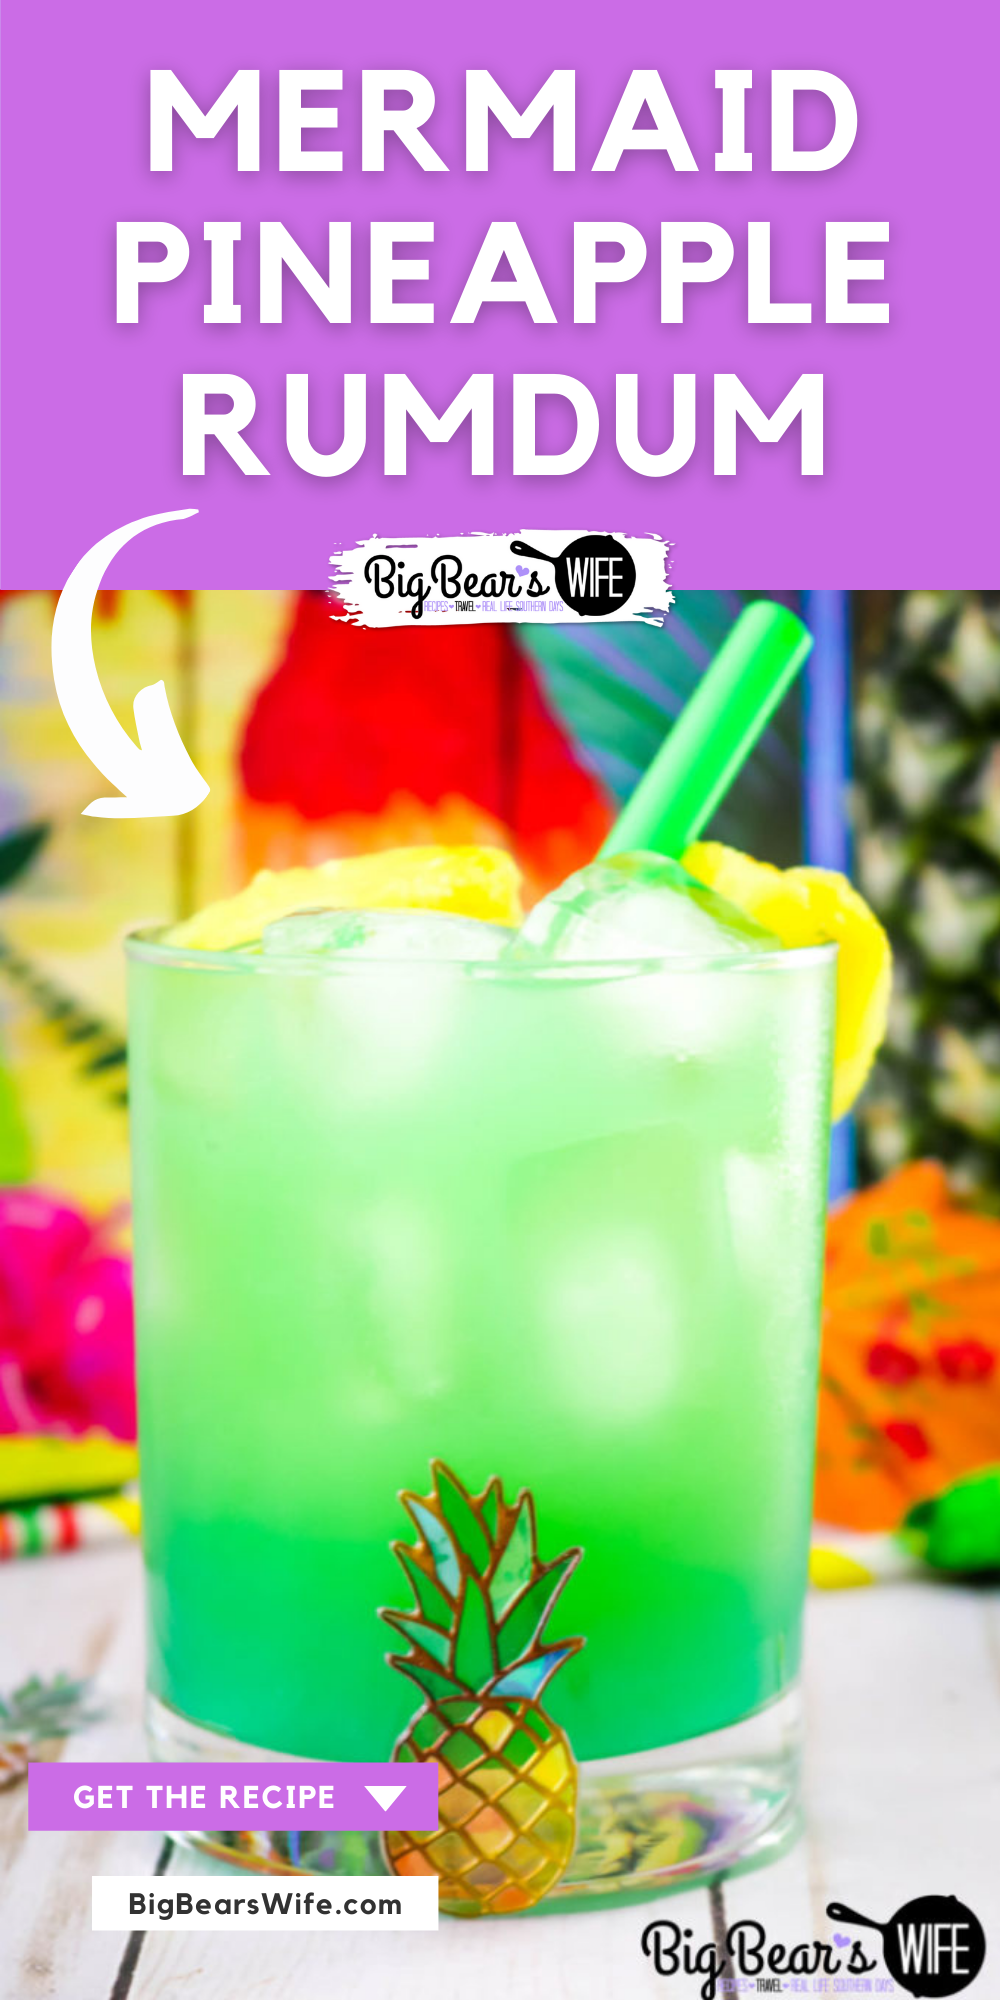 This Mermaid Pineapple RumDum will make you feel like you’re hanging out on the beach and after a few you might feel like you’re swimming with mermaids! It’s got pineapple rum and vanilla rum mixed plus it’s topped with extra pineapple! For an extra kick, soak the pineapple pieces in rum for a few days beforehand! 

 via @bigbearswife